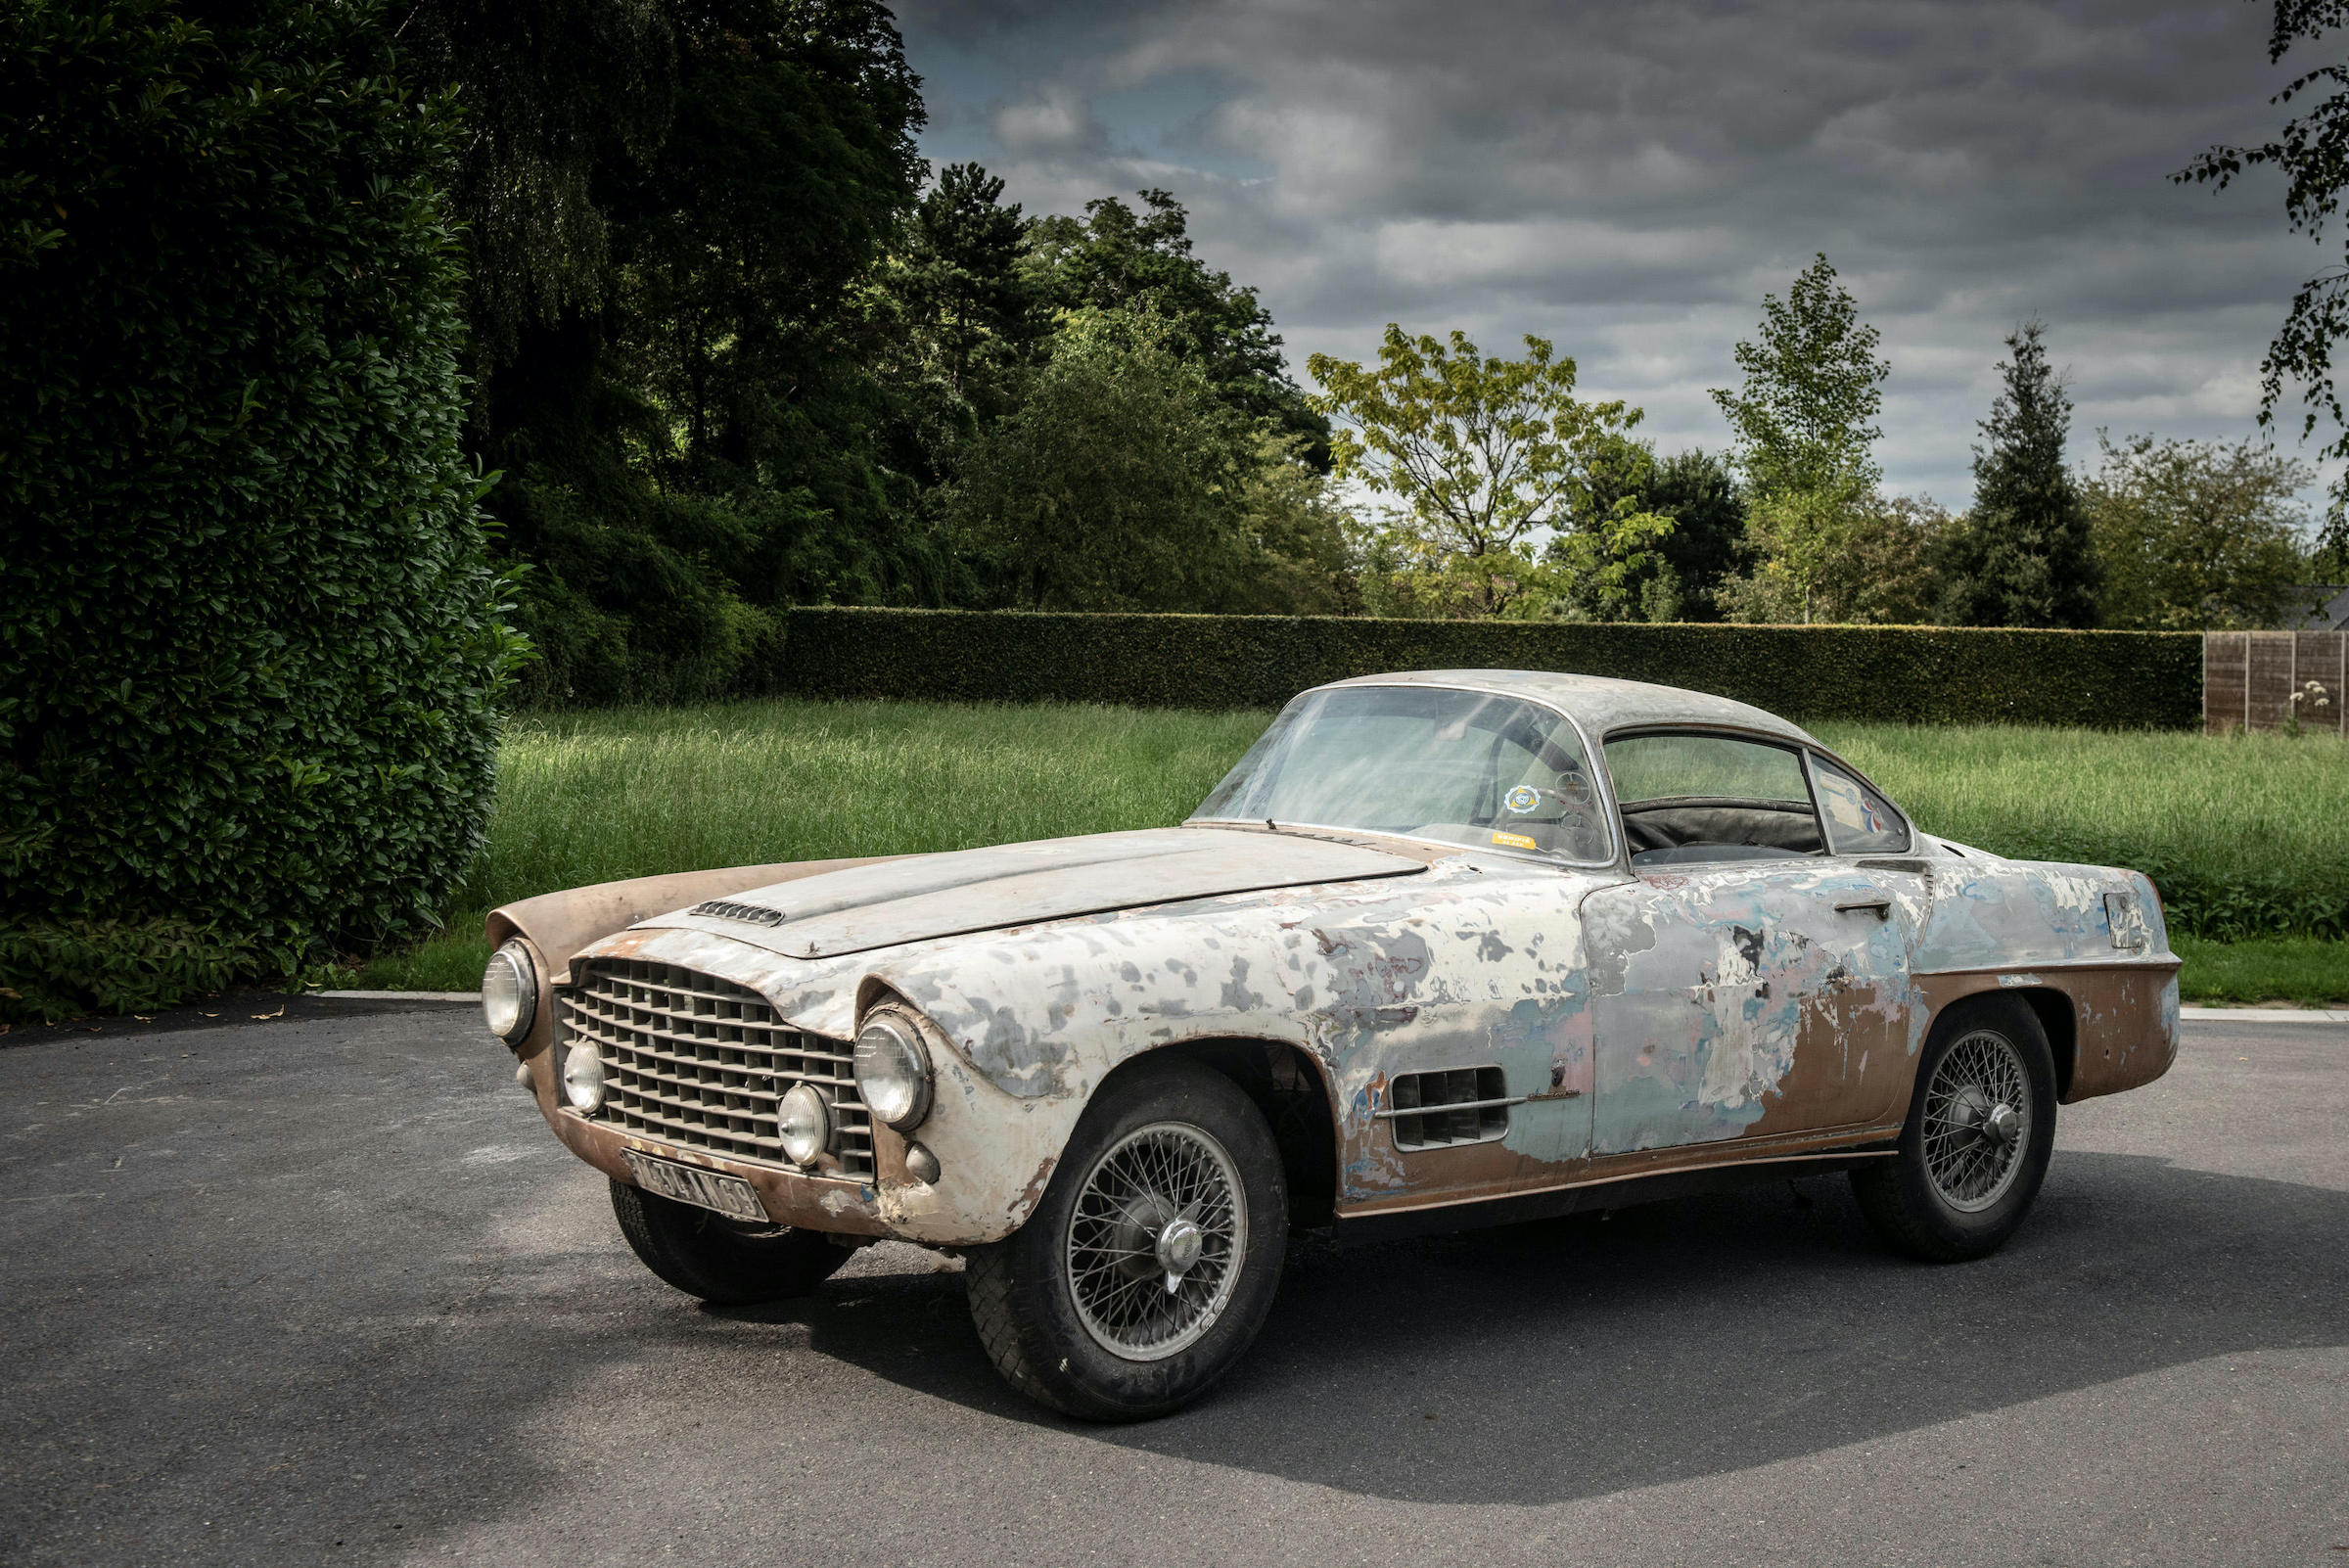 Show star turned racer: Ghia-bodied XK140 up for auction